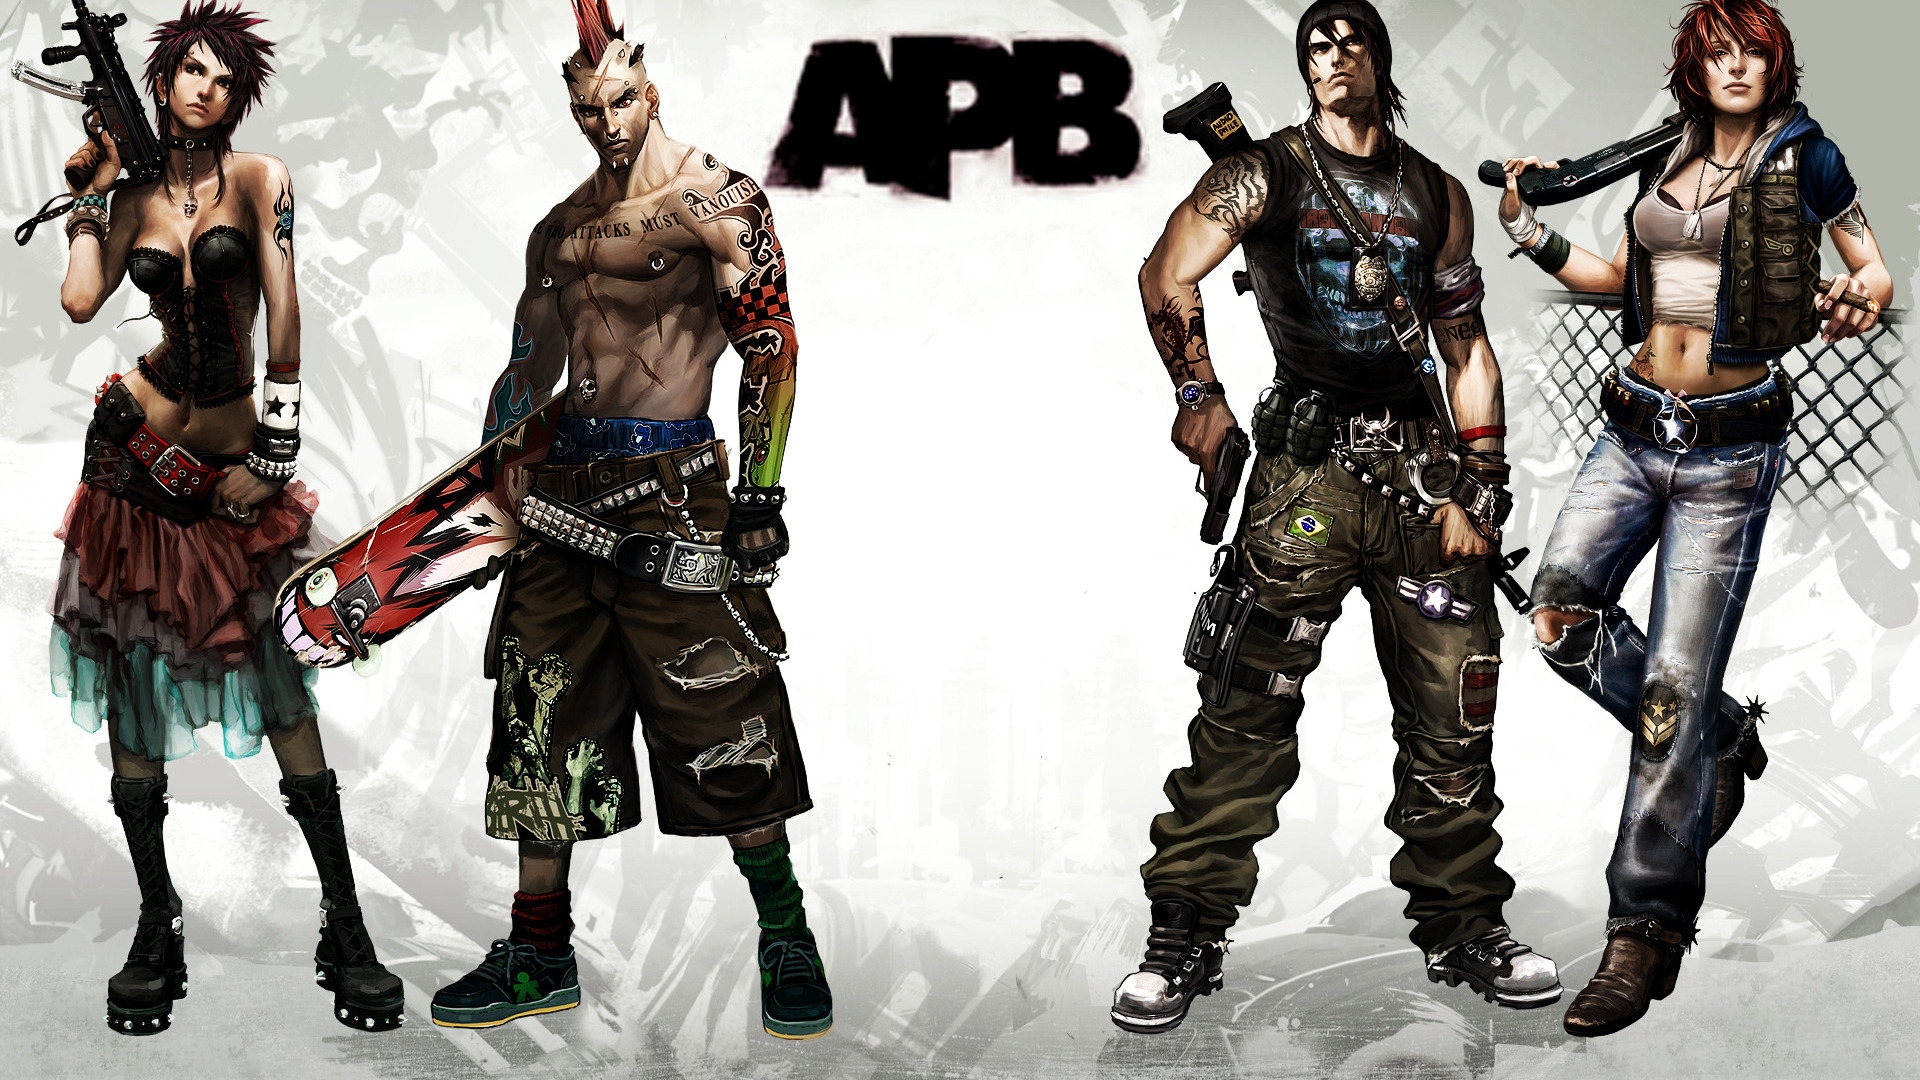 APB All Points Bulletin for 1920 x 1080 HDTV 1080p resolution